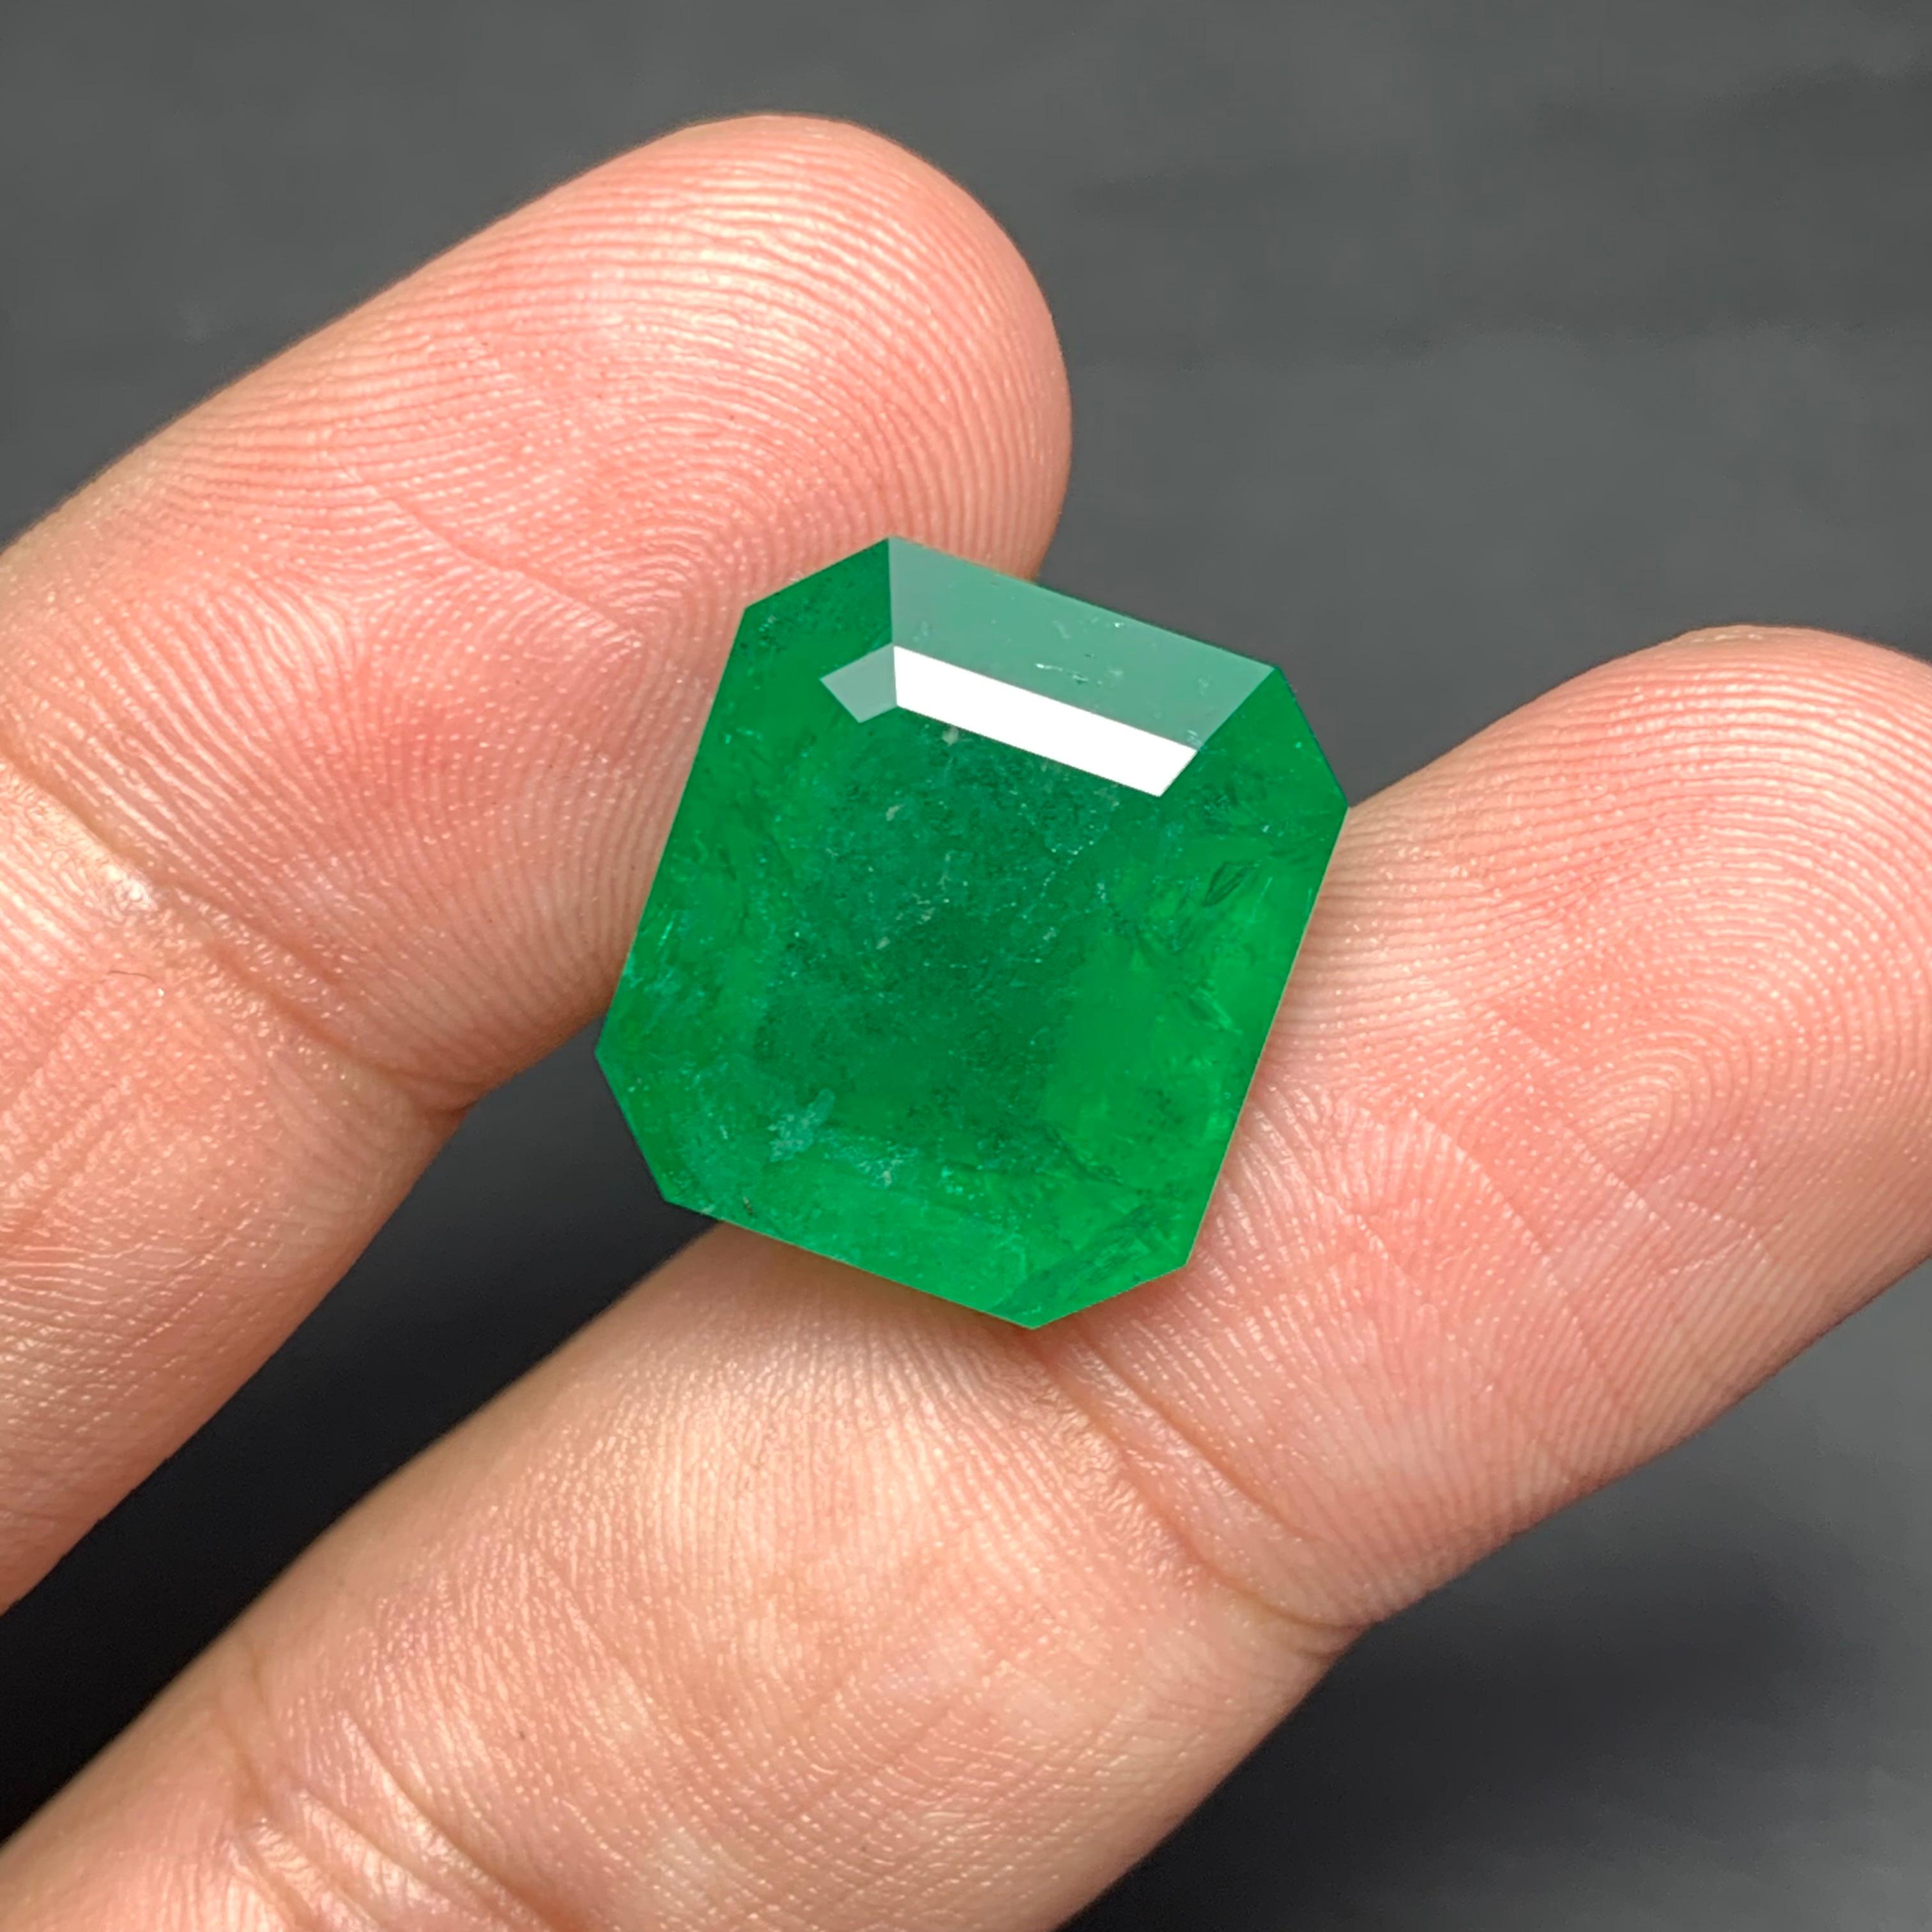 Loose Emerald 
Weight: 14.70 Carats 
Dimension: 16.2x14.4x8.3 Mm
Origin: Zambia
Shape: Emerald 
Color; Green
Treatment: Non
Certificate: On Customer Demand
Zambia is renowned for producing some of the world's finest emeralds, prized for their deep